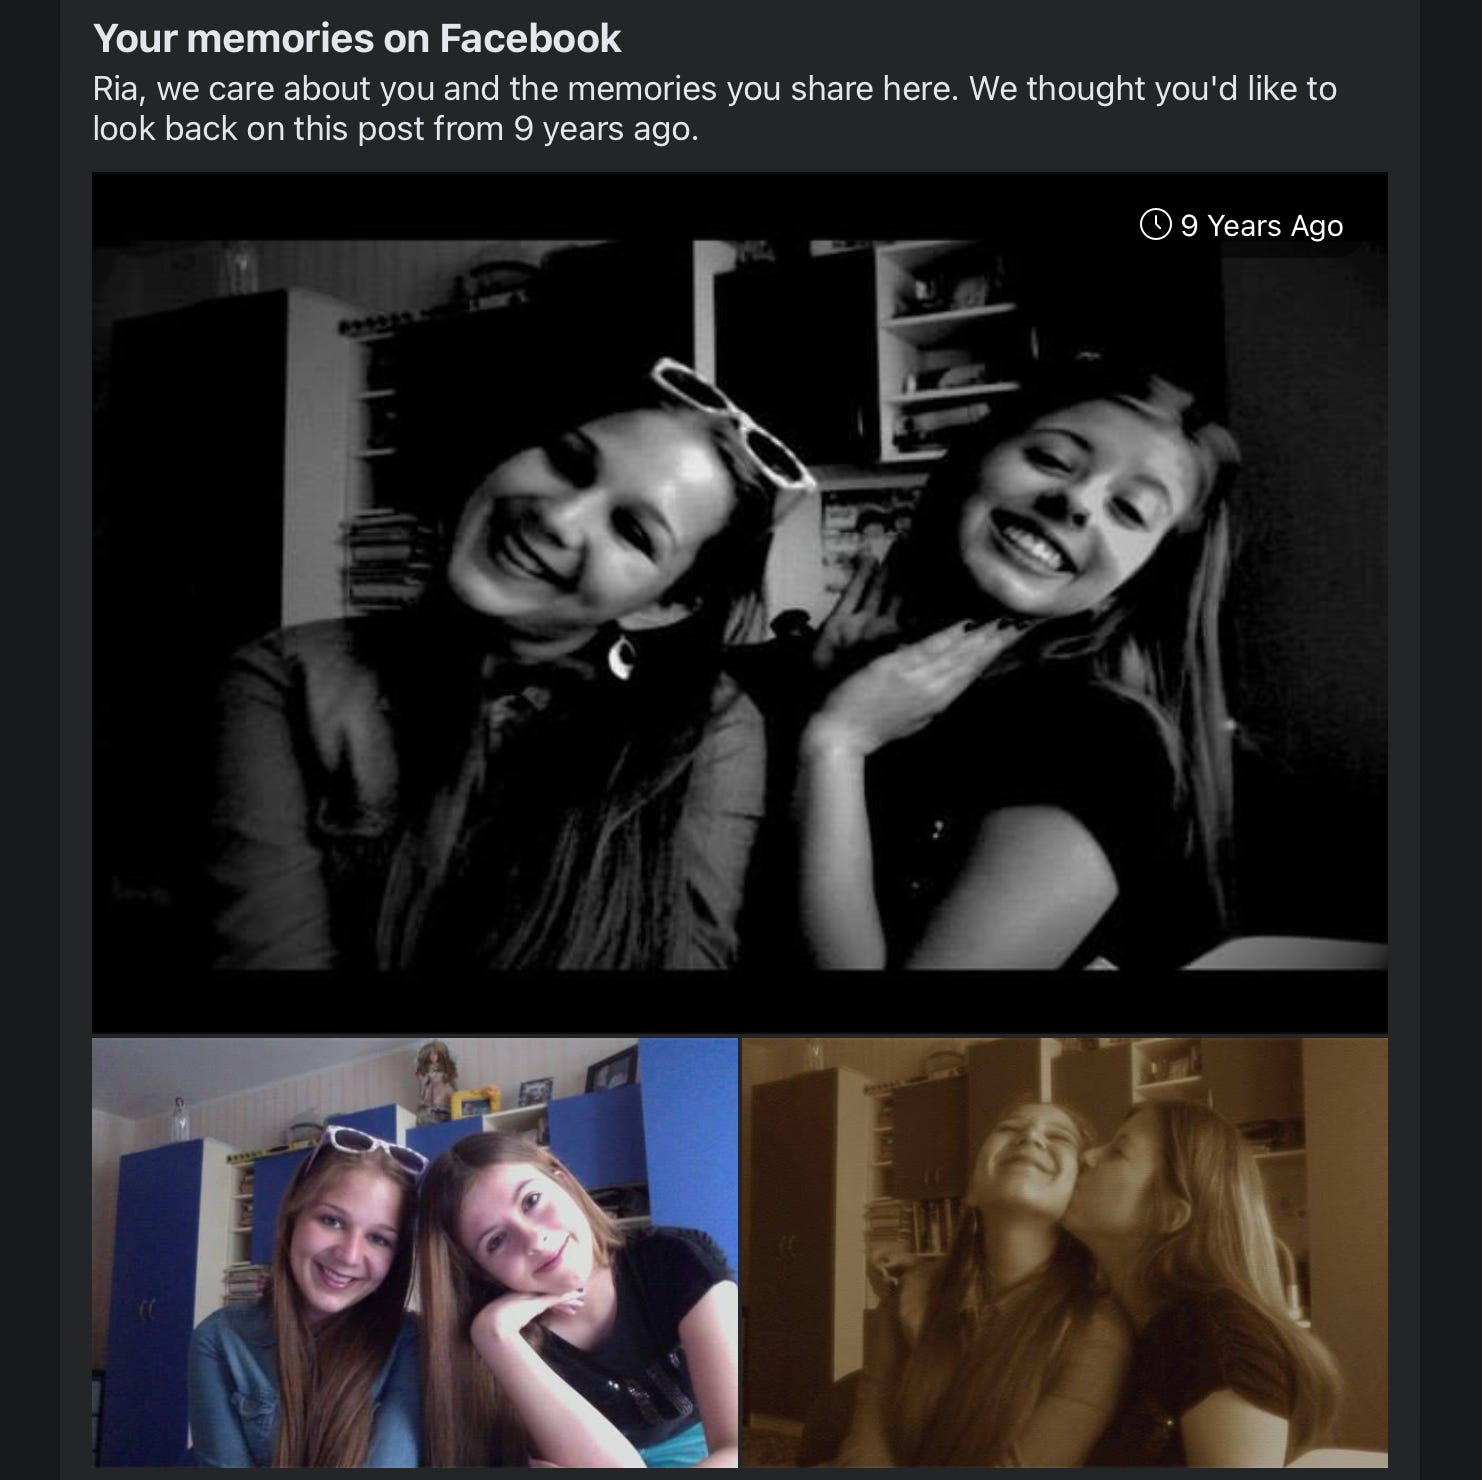 A screenshot from Facebook labeled "Your memories on Facebook" showing a post from 9 years ago with 3 webcam photos of two teenage girls with long brown hair having fun in front of a room with blue shelves.